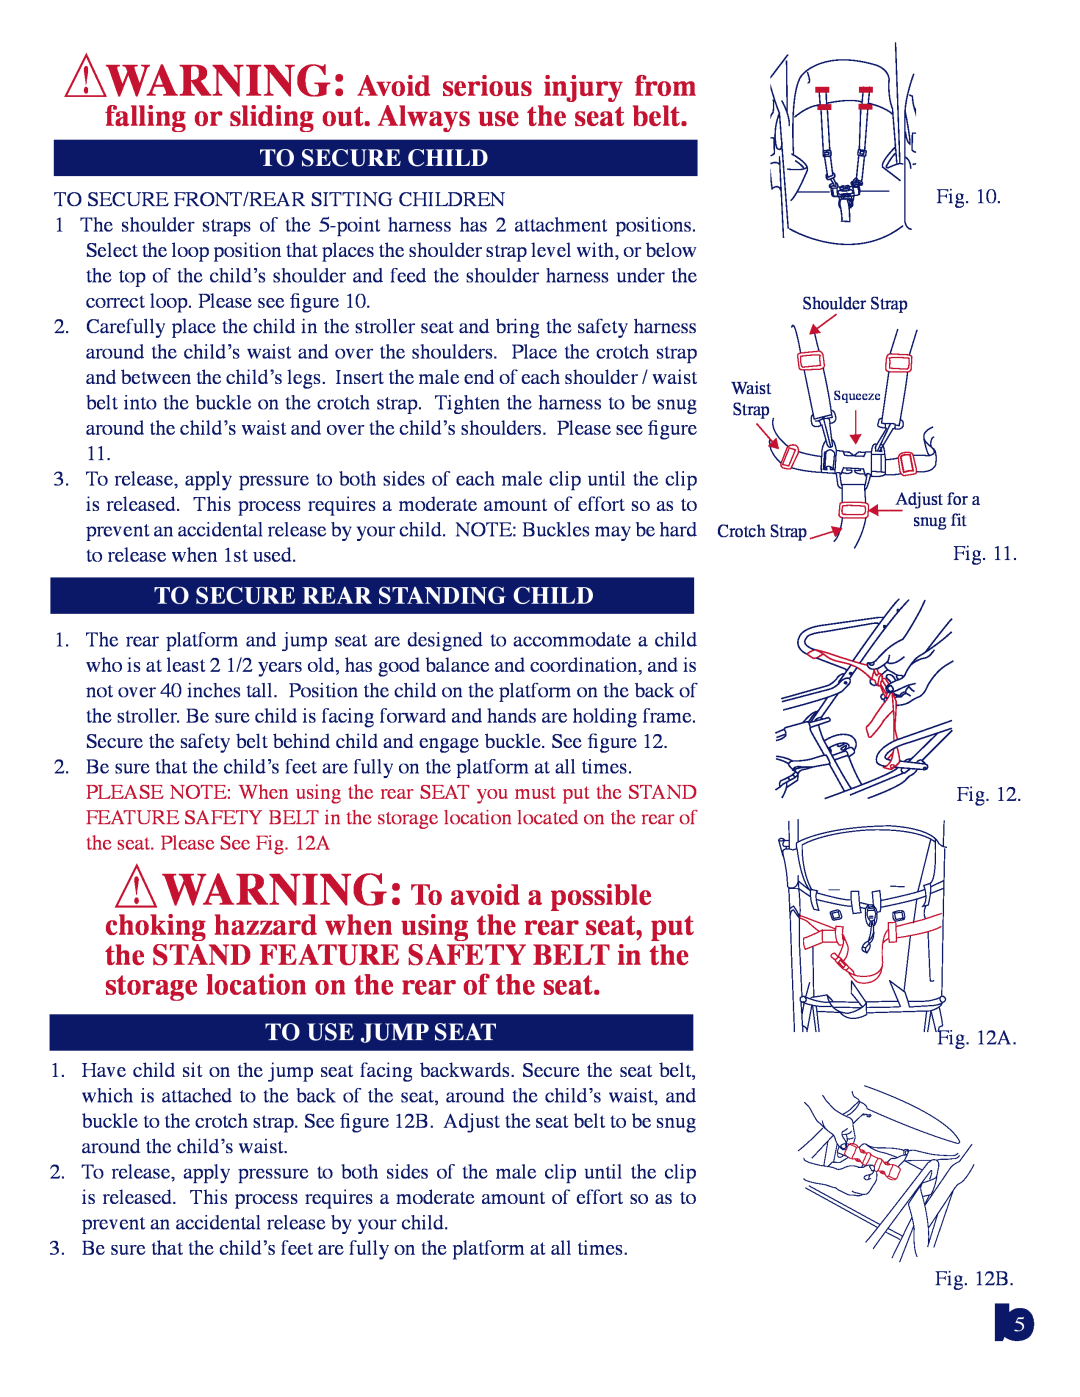 Baby Trend 7581 manual To Secure Child, To Secure Rear Standing Child, To Use Jump Seat 